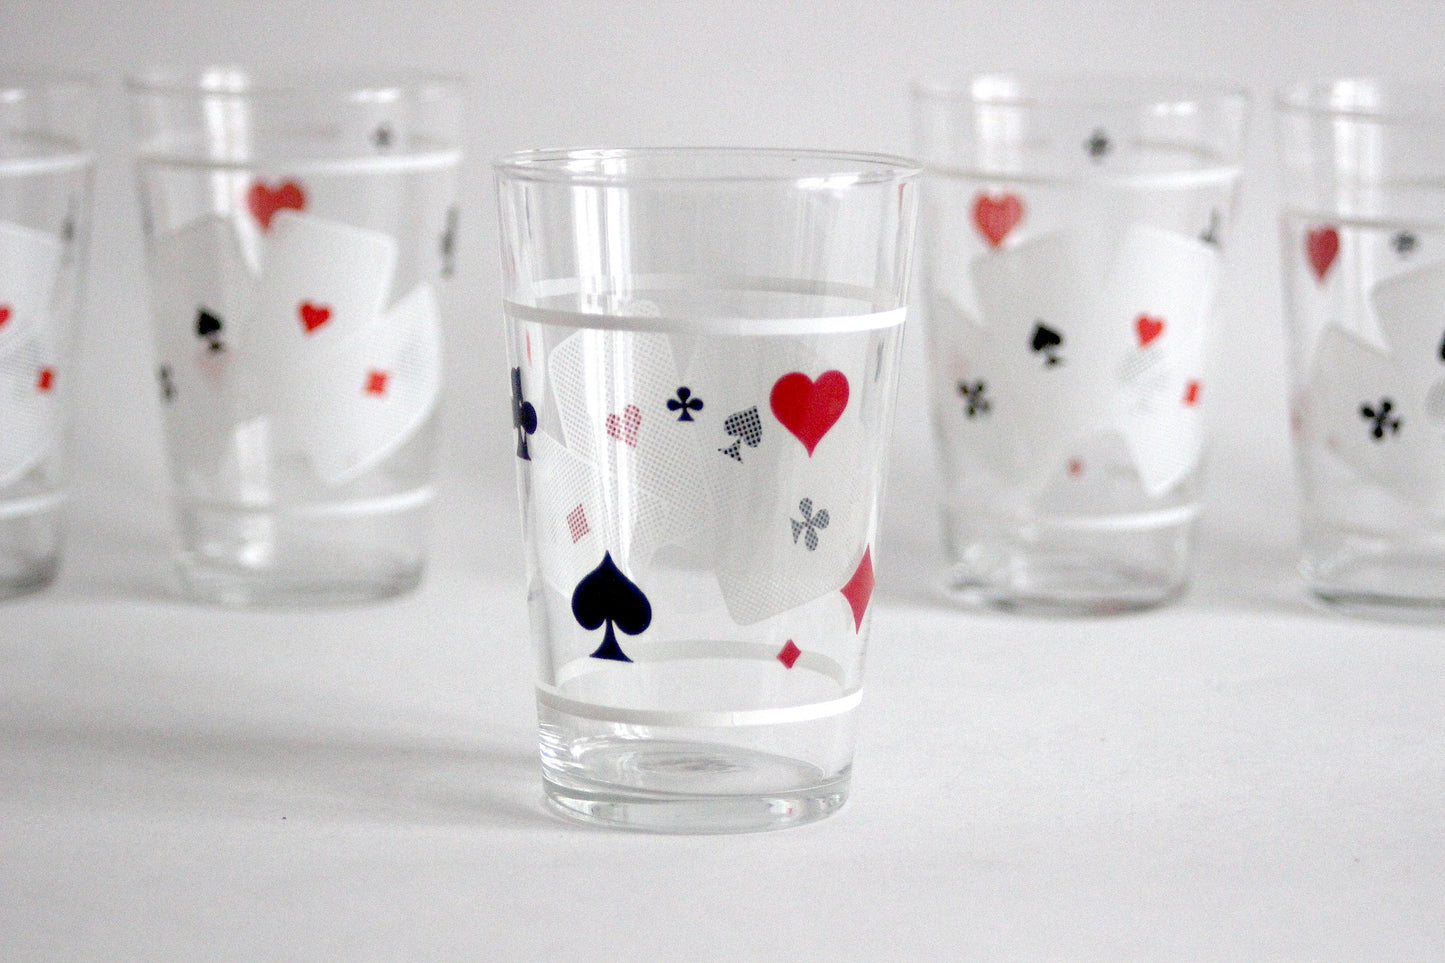 Vintage glass set of 6 drinking glasses with Poker cards motive. Handmade, 60s. Mid-Century Style.